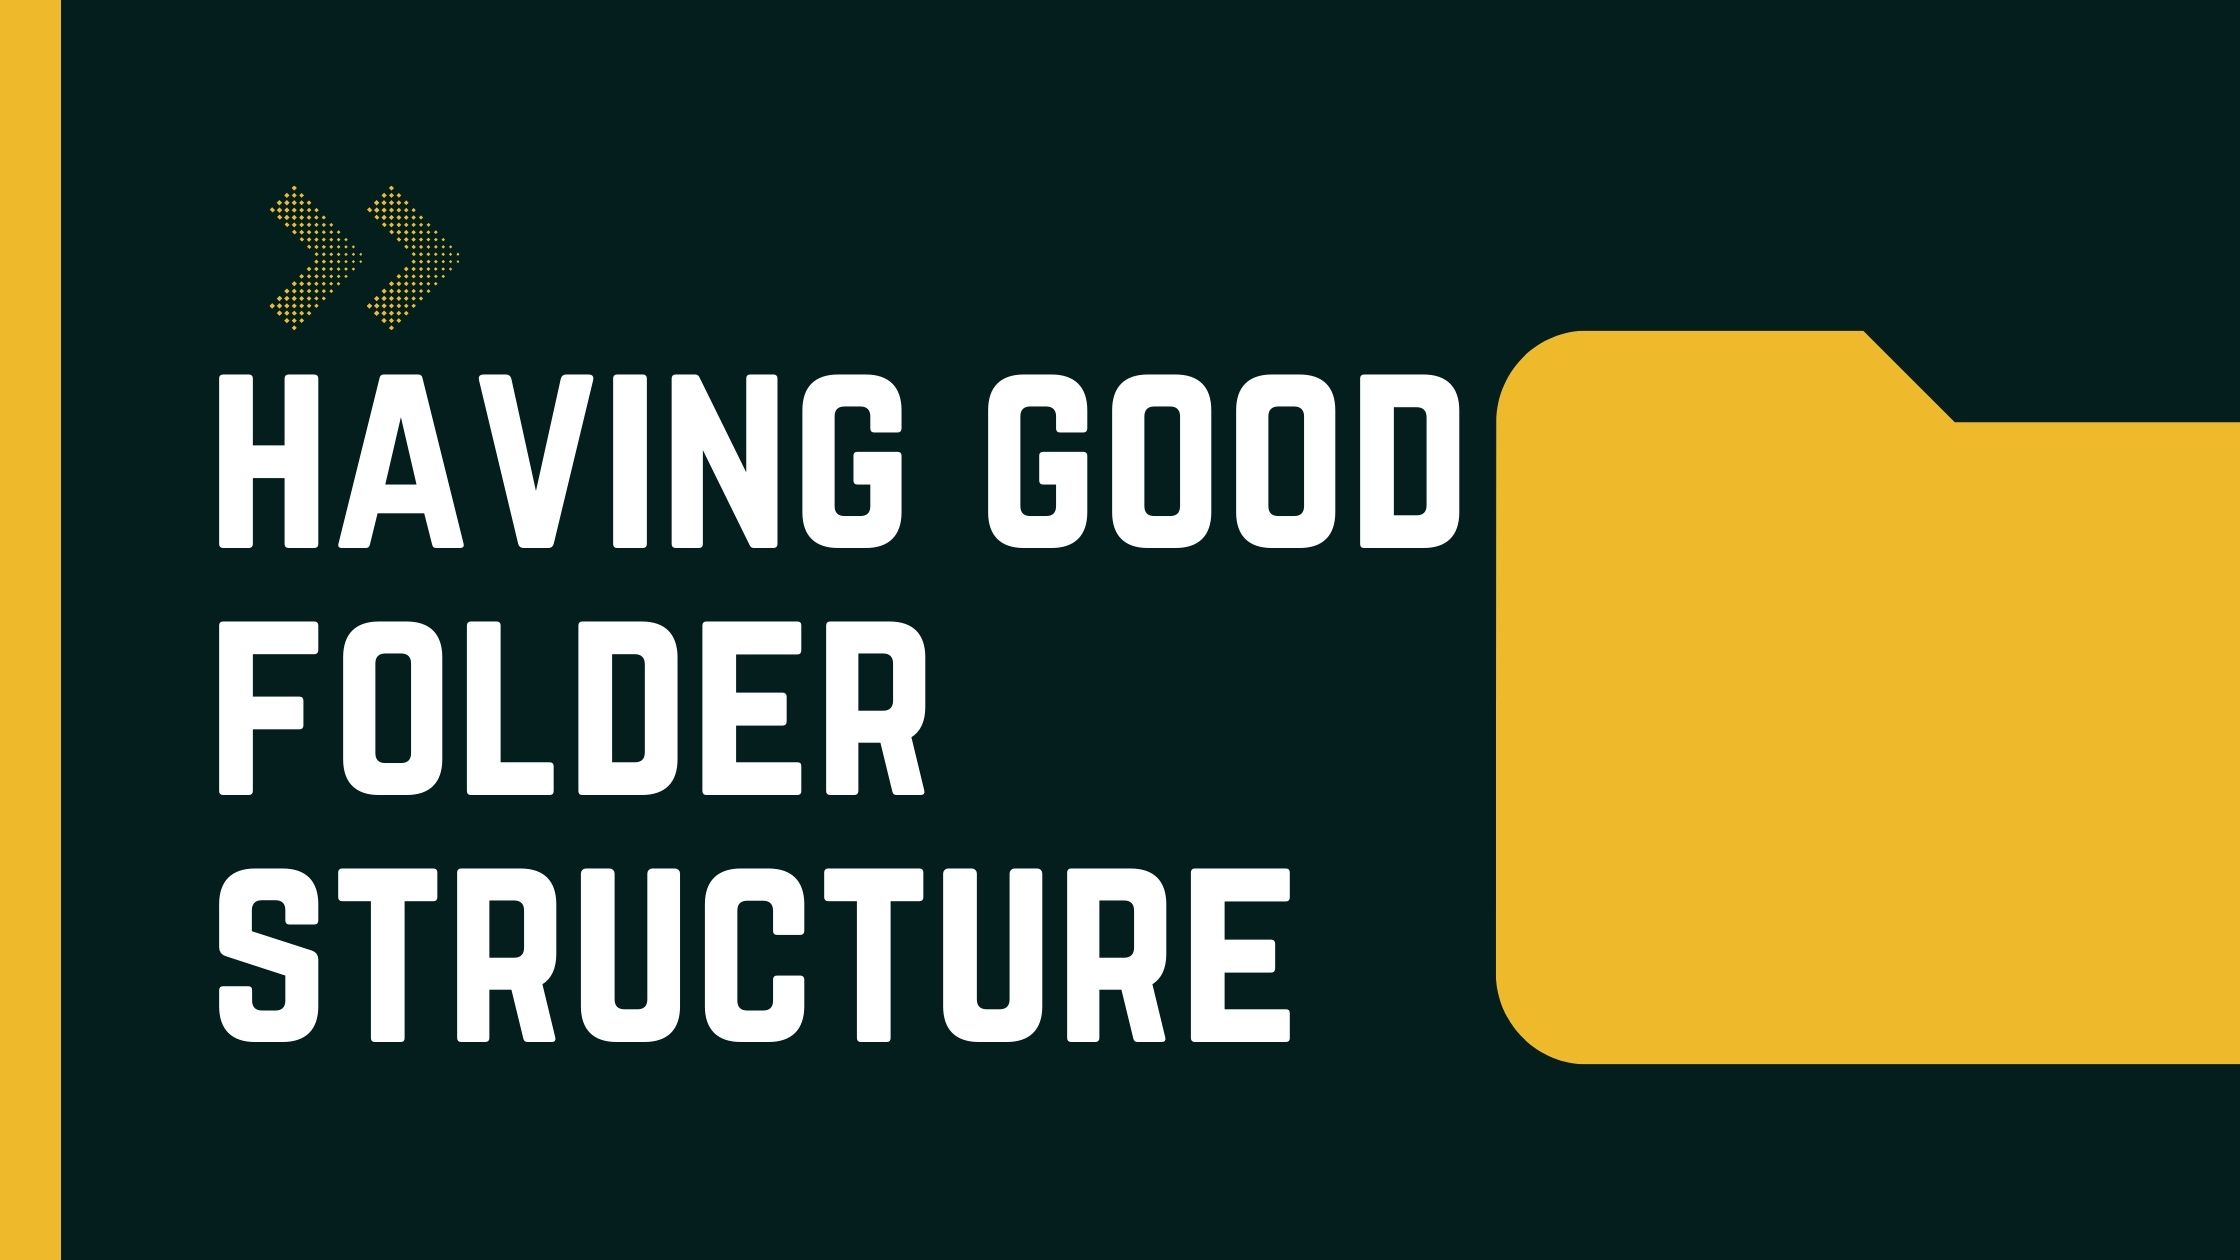 The importance of having good folder structure